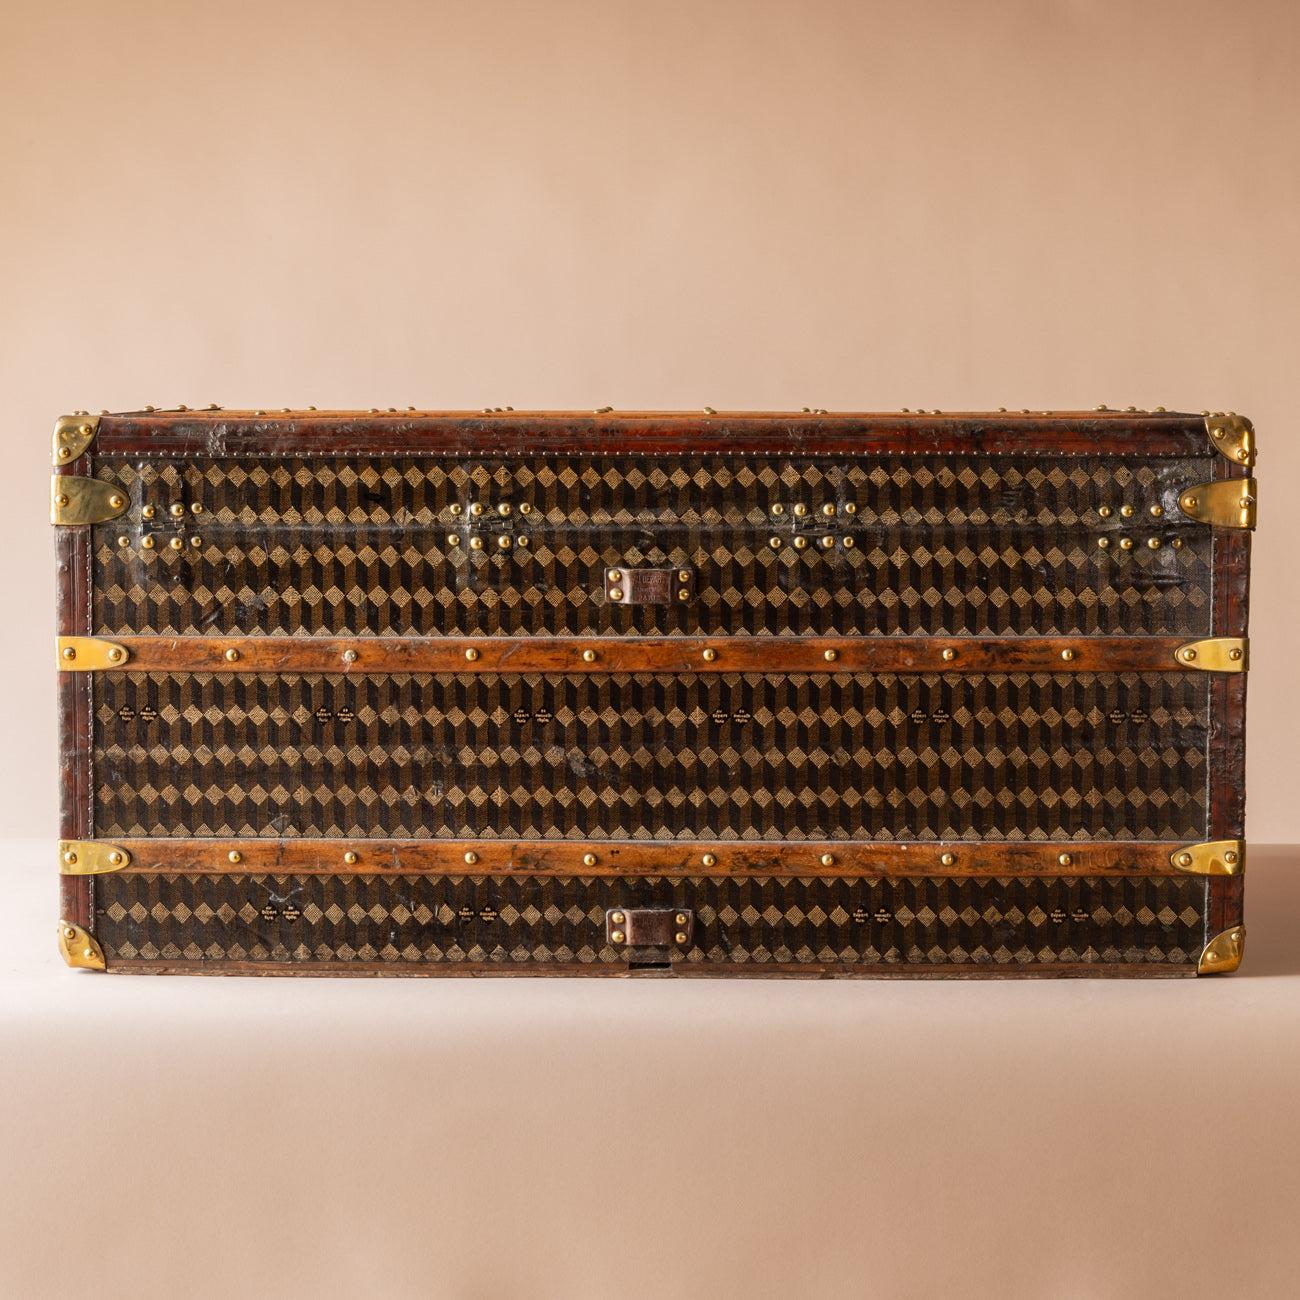 A glorious trunk by the French maker Au Départ. With brass fittings and leather trim. Circa 1910. The damaged original cotton lining to the interior has been replaced with a similar one to match.

Dimensions: 101 cm/39¾ inches (length) x 53 cm/20?